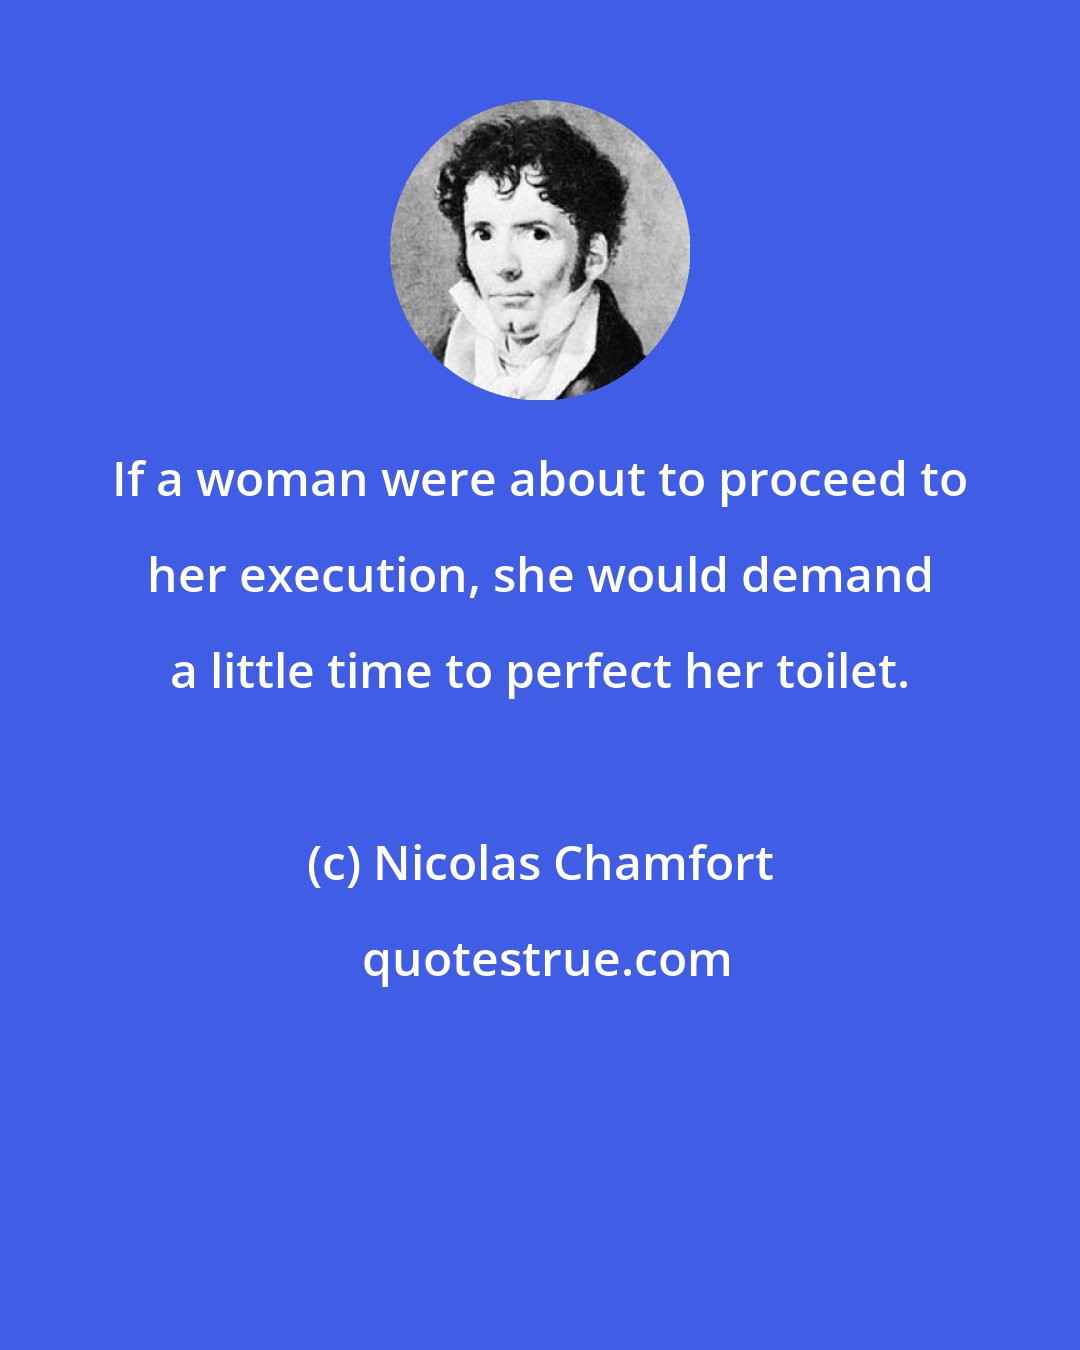 Nicolas Chamfort: If a woman were about to proceed to her execution, she would demand a little time to perfect her toilet.